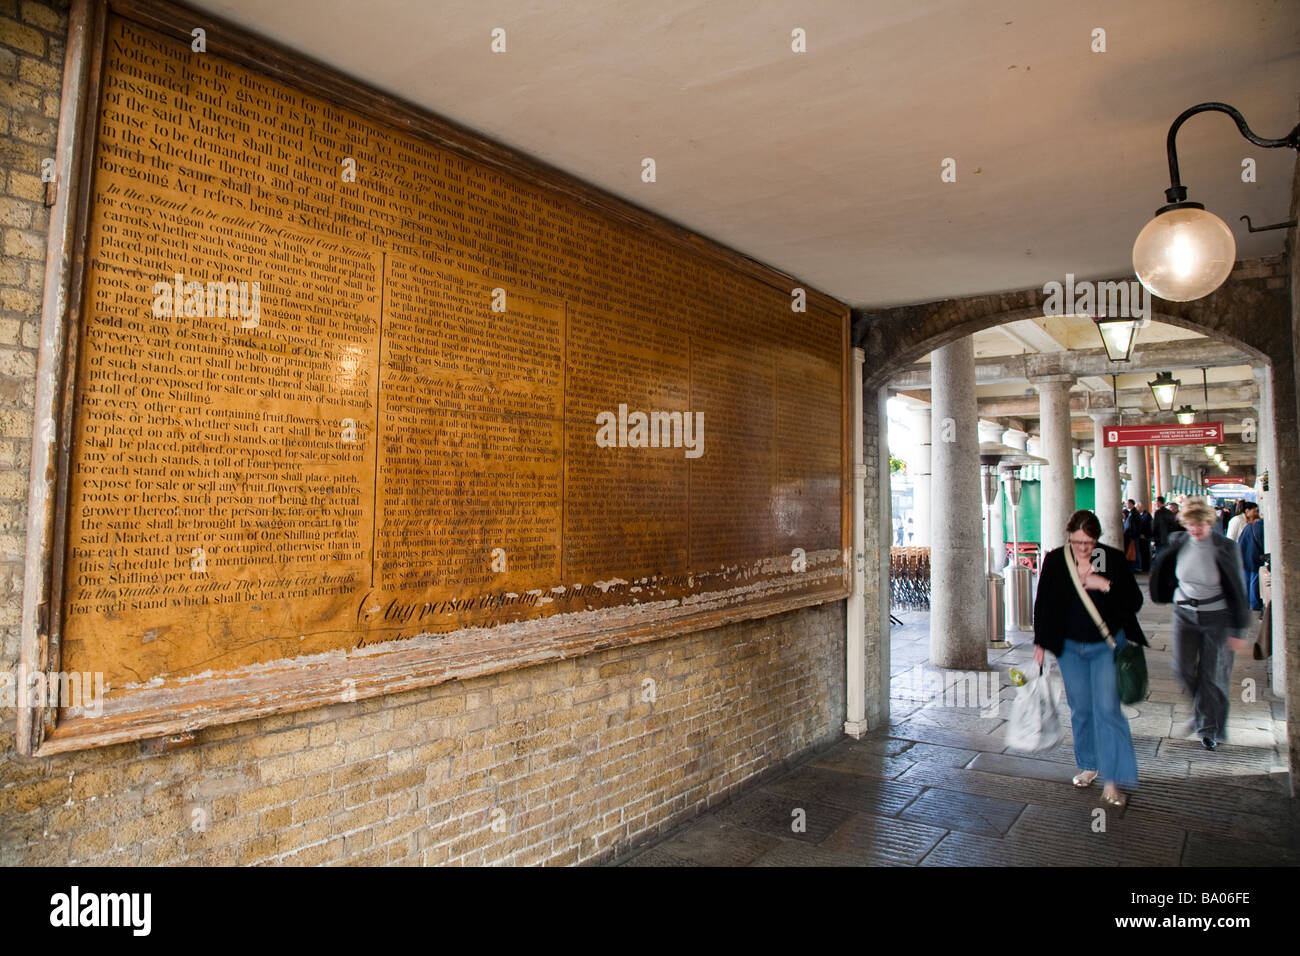 Historic 'Rules, orders and bylaws' public notice in Covent Garden Market, London Stock Photo